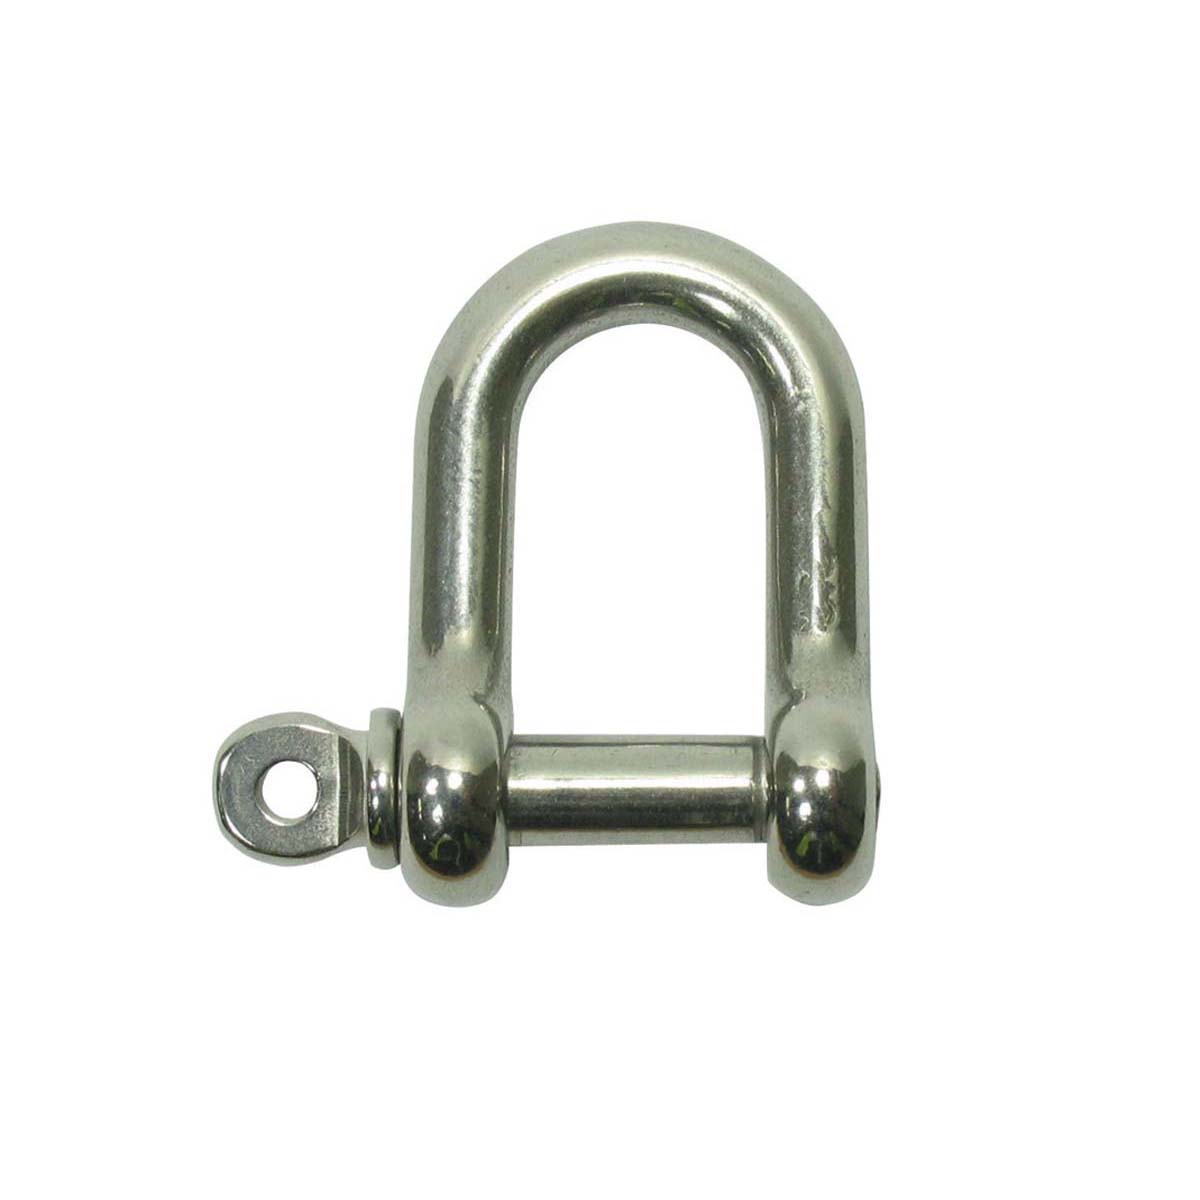 Blueline Stainless Steel D Shackle 8mm